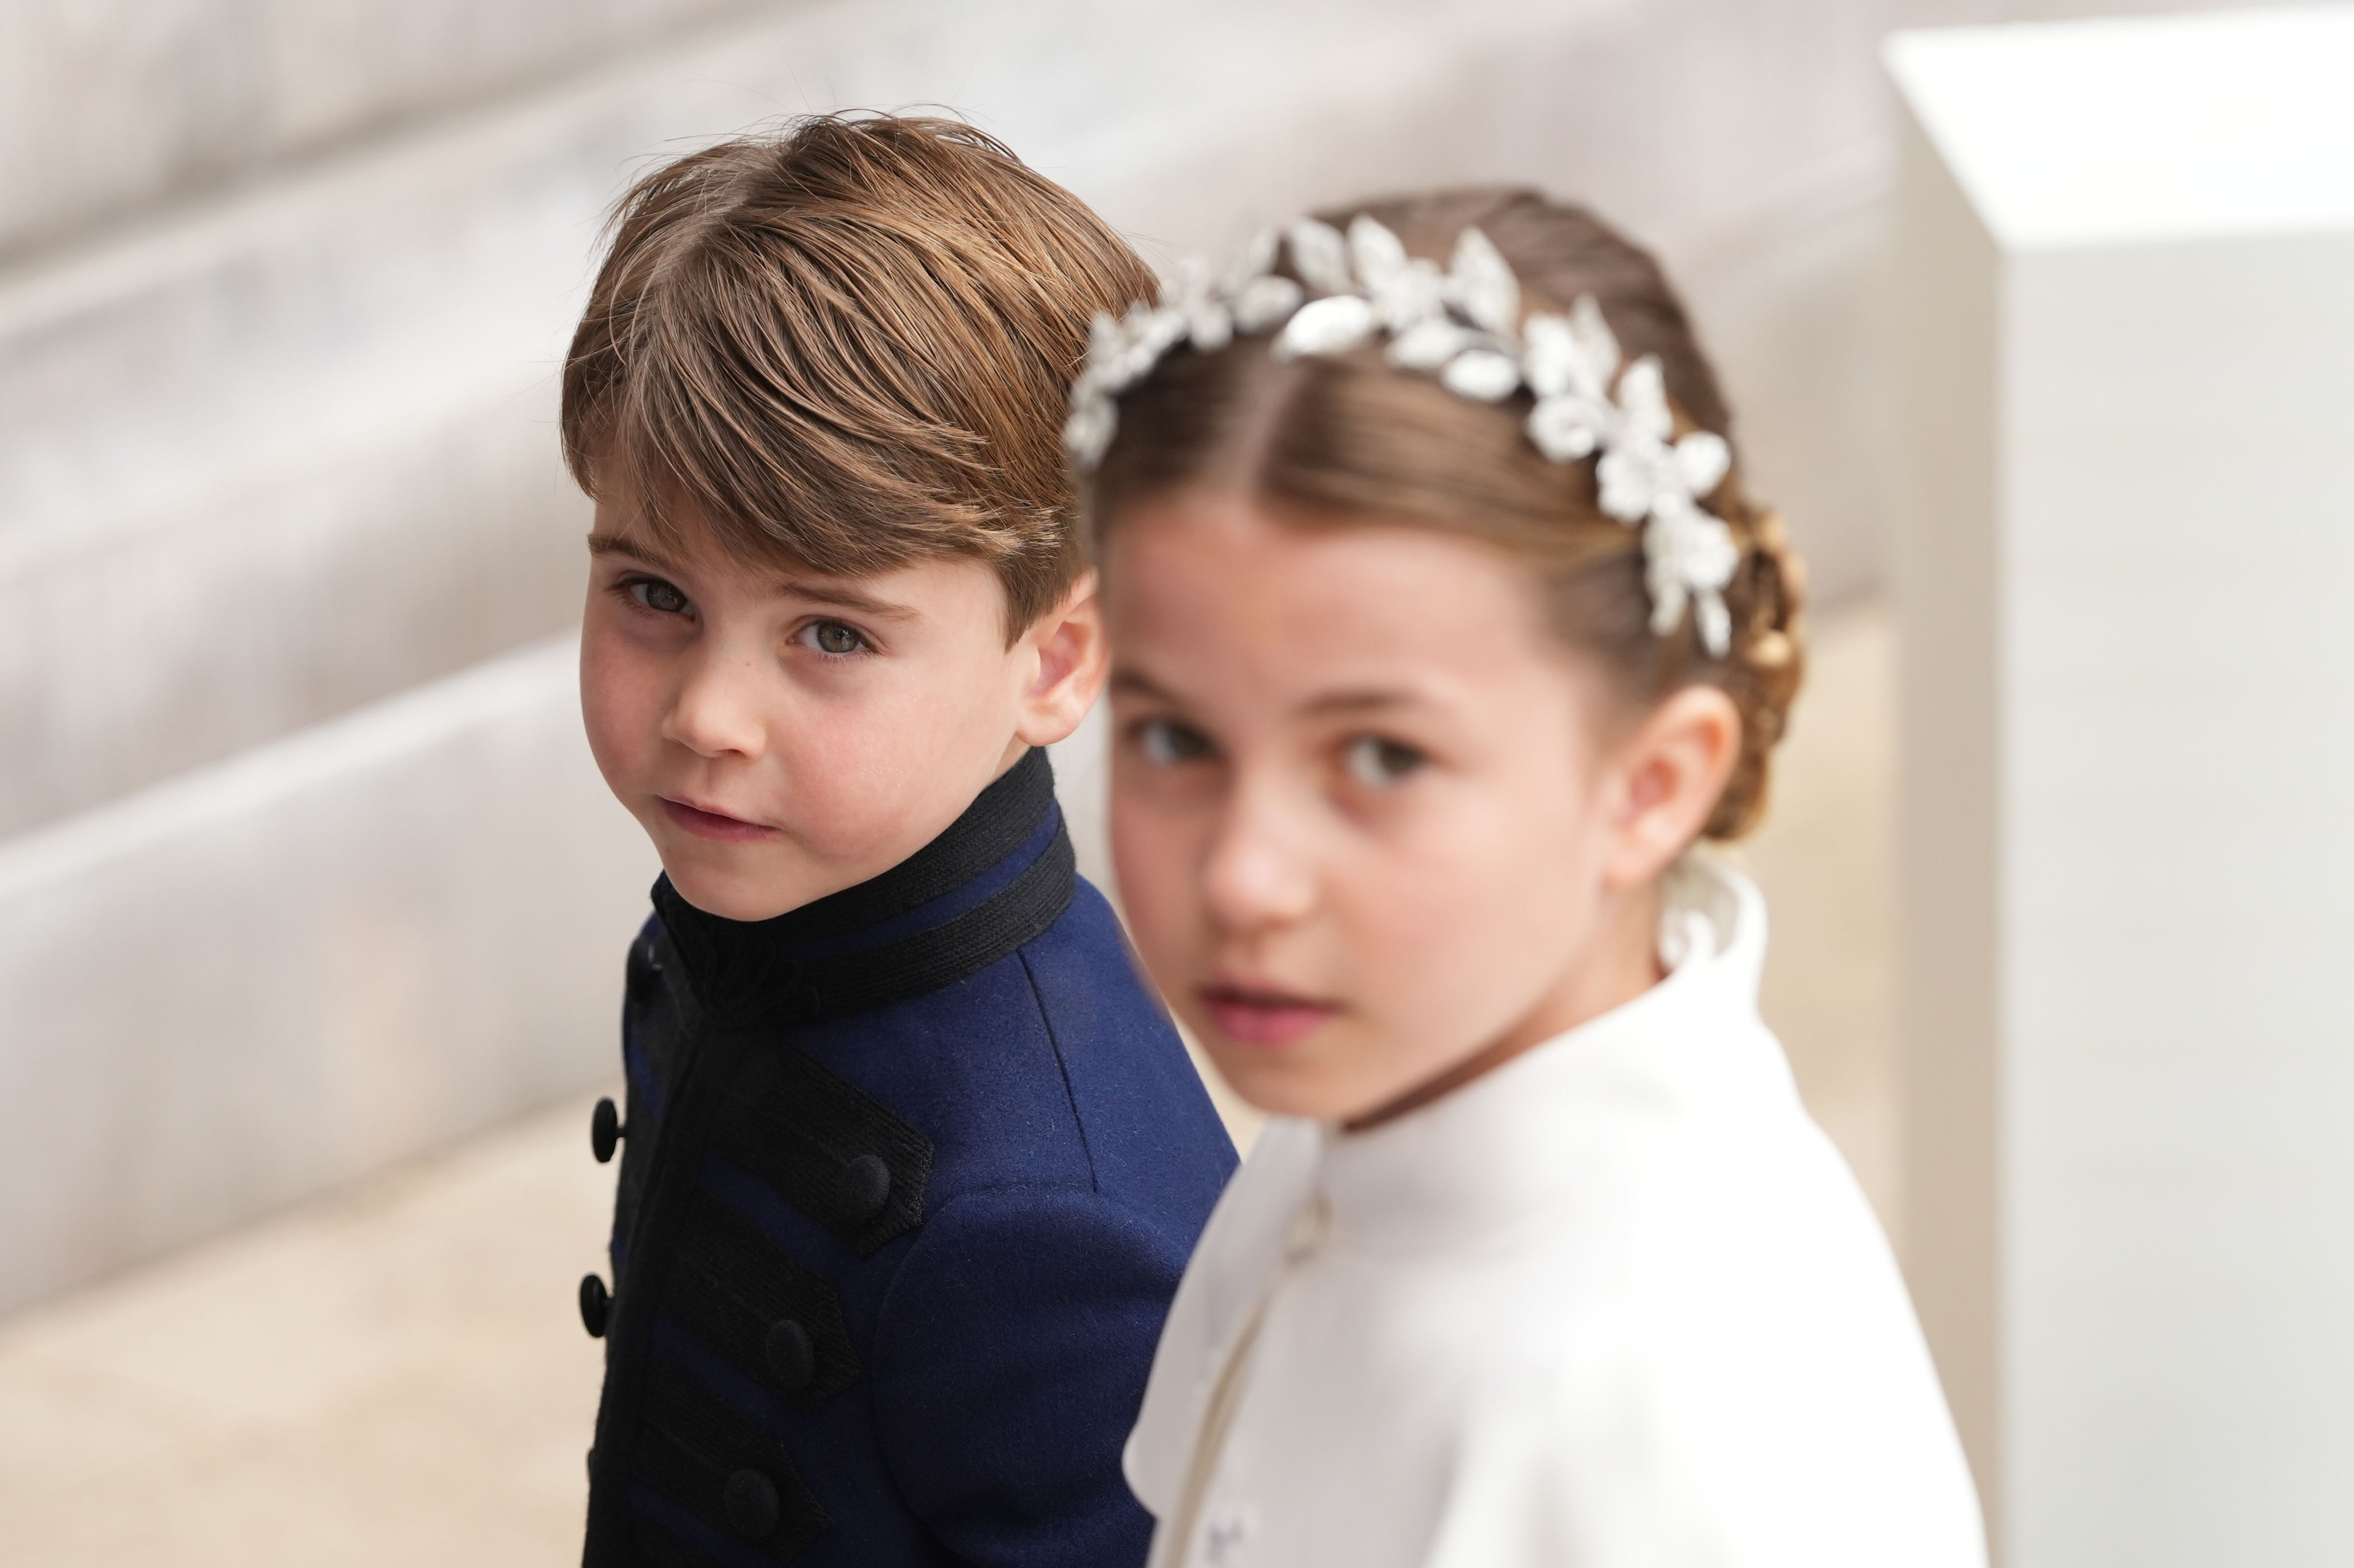 <p><span>Prince Louis and Princess Charlotte looked angelic as they arrived at Westminster Abbey in London for </span><a href="https://www.wonderwall.com/celebrity/the-coronation-of-king-charles-iii-and-queen-camilla-the-best-pictures-of-all-the-royals-at-this-historic-event-735015.gallery">the coronation</a><span> of King Charles III and Queen Camilla on May 6, 2023.</span></p>